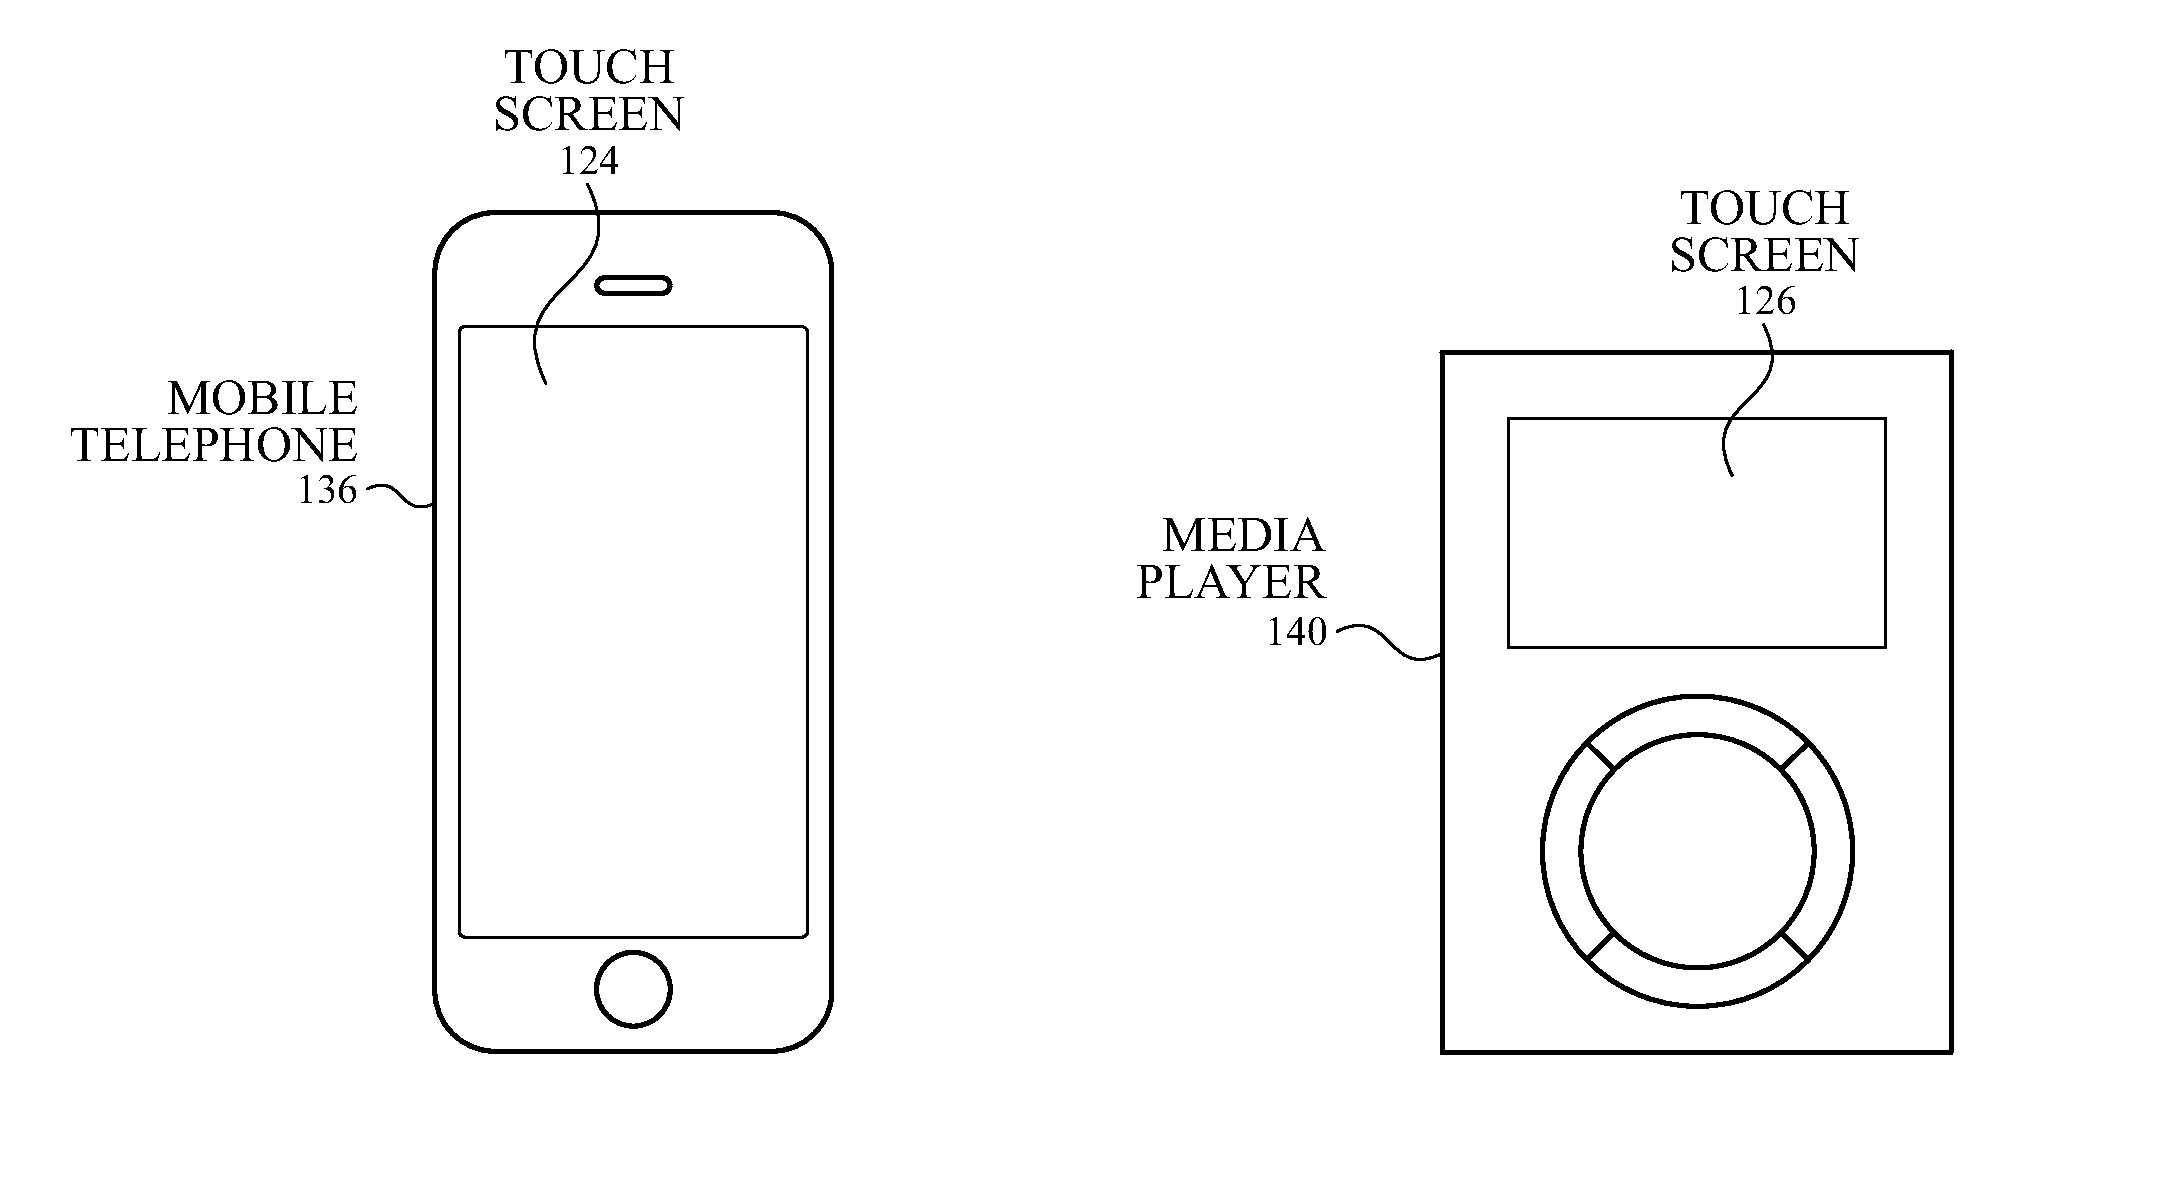 Timing scheme for touch screen supporting variable refresh rate